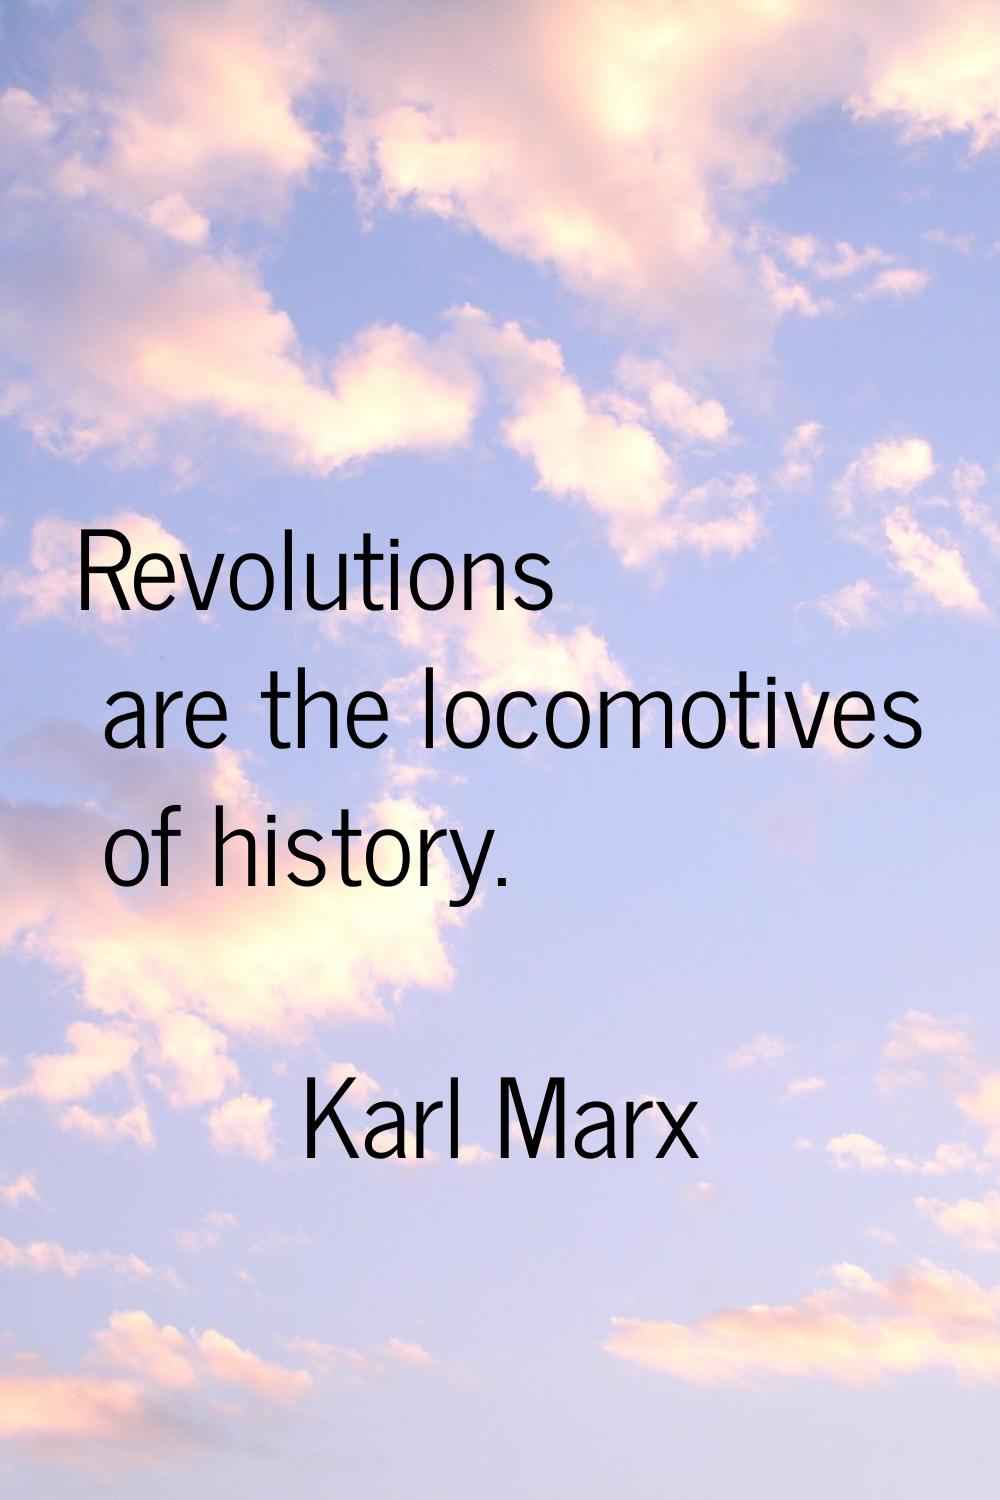 Revolutions are the locomotives of history.